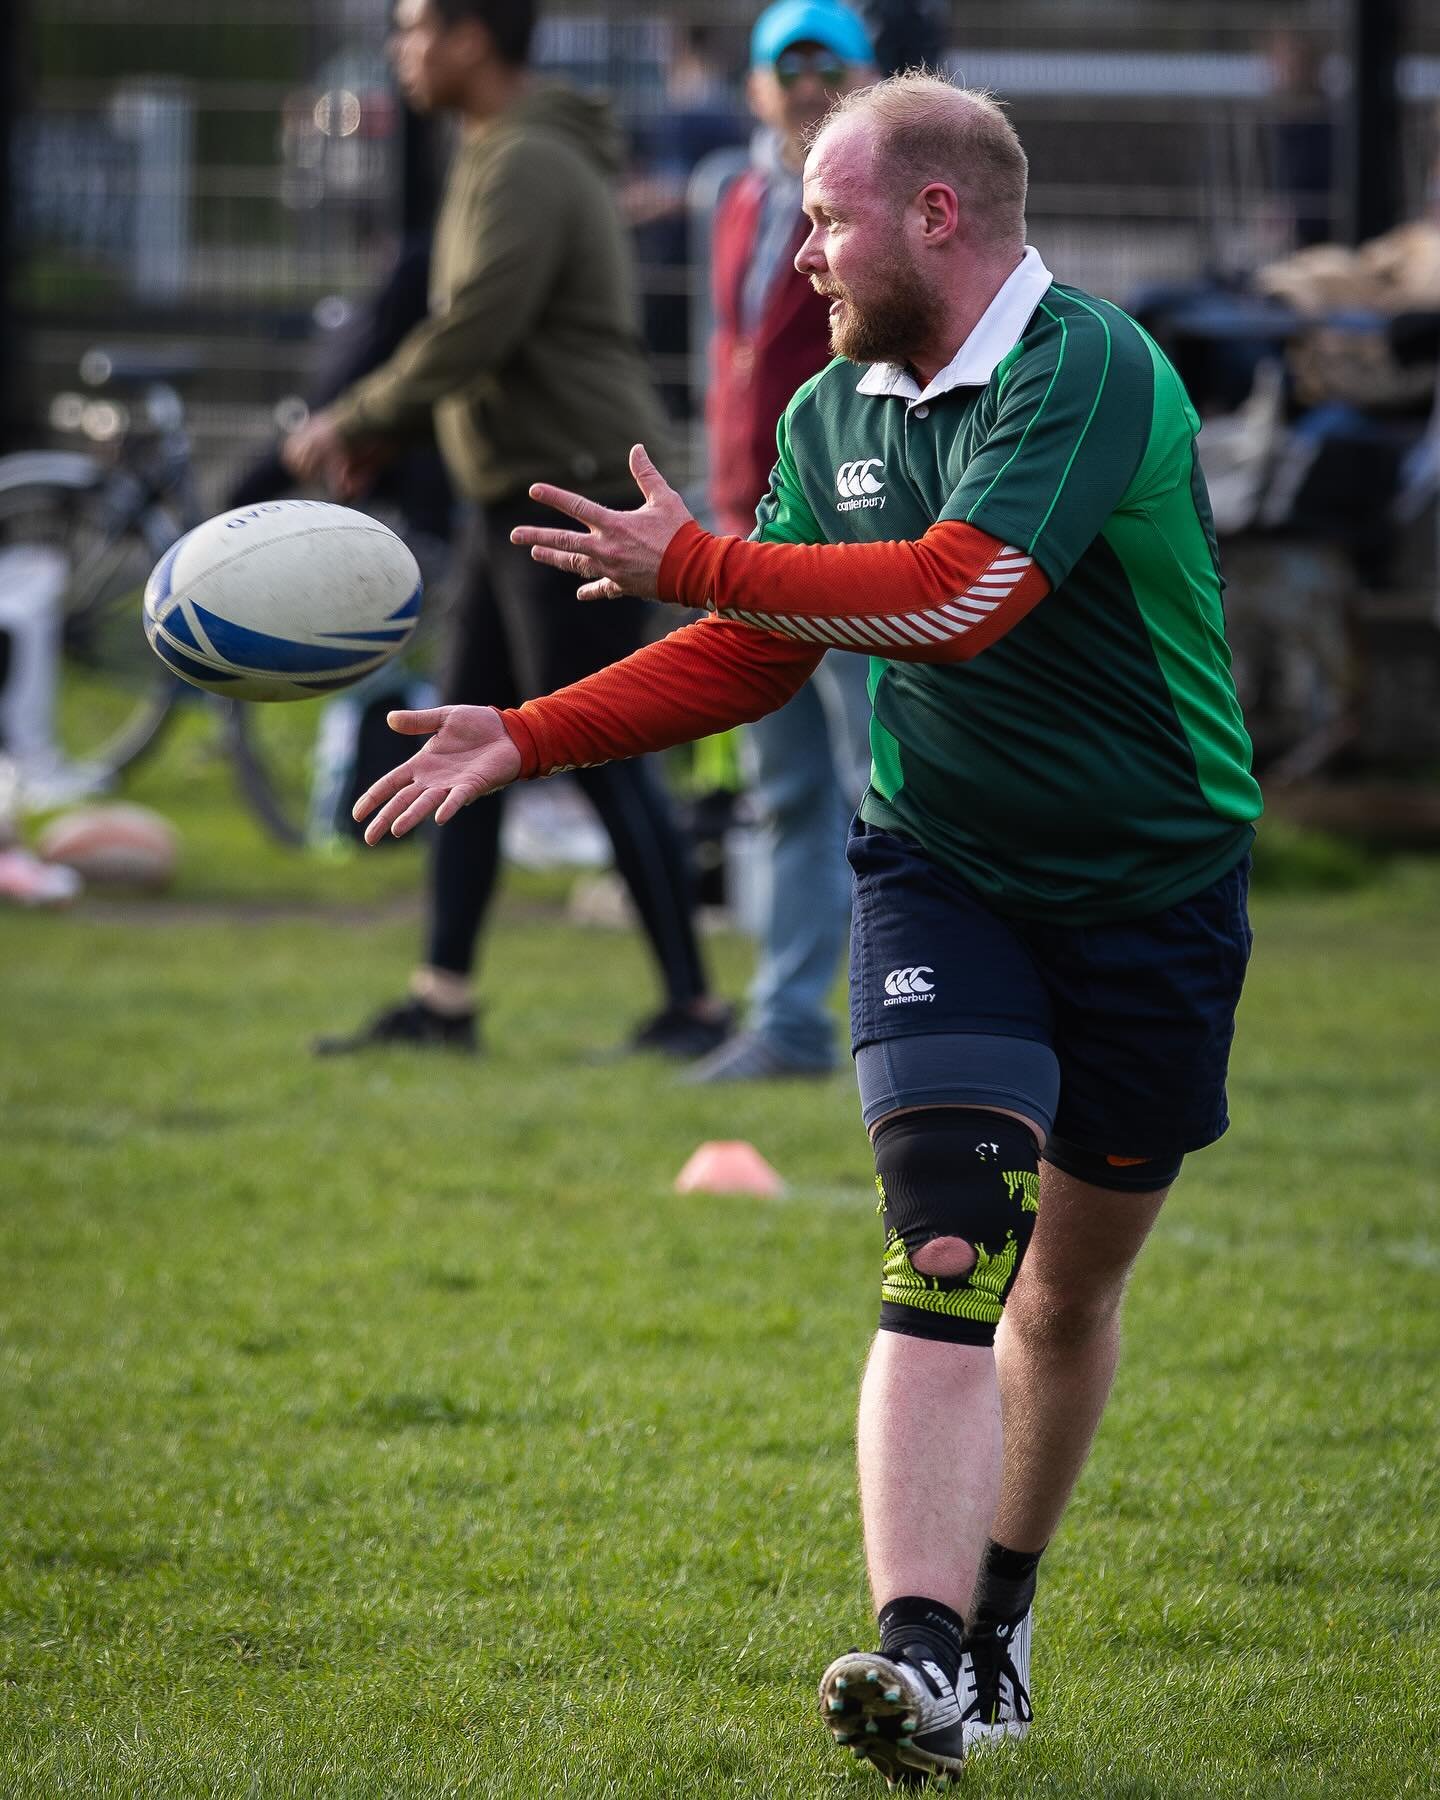 🐺 Gearing up and keeping the momentum! 🏉 Yesterday&rsquo;s practice with the Copenhagen Wolves was 🔥. As we prep for the Bingham Cup in just over a month, every session counts. Huge thanks to @bdekoning for capturing these epic moments! 📸

Photo 